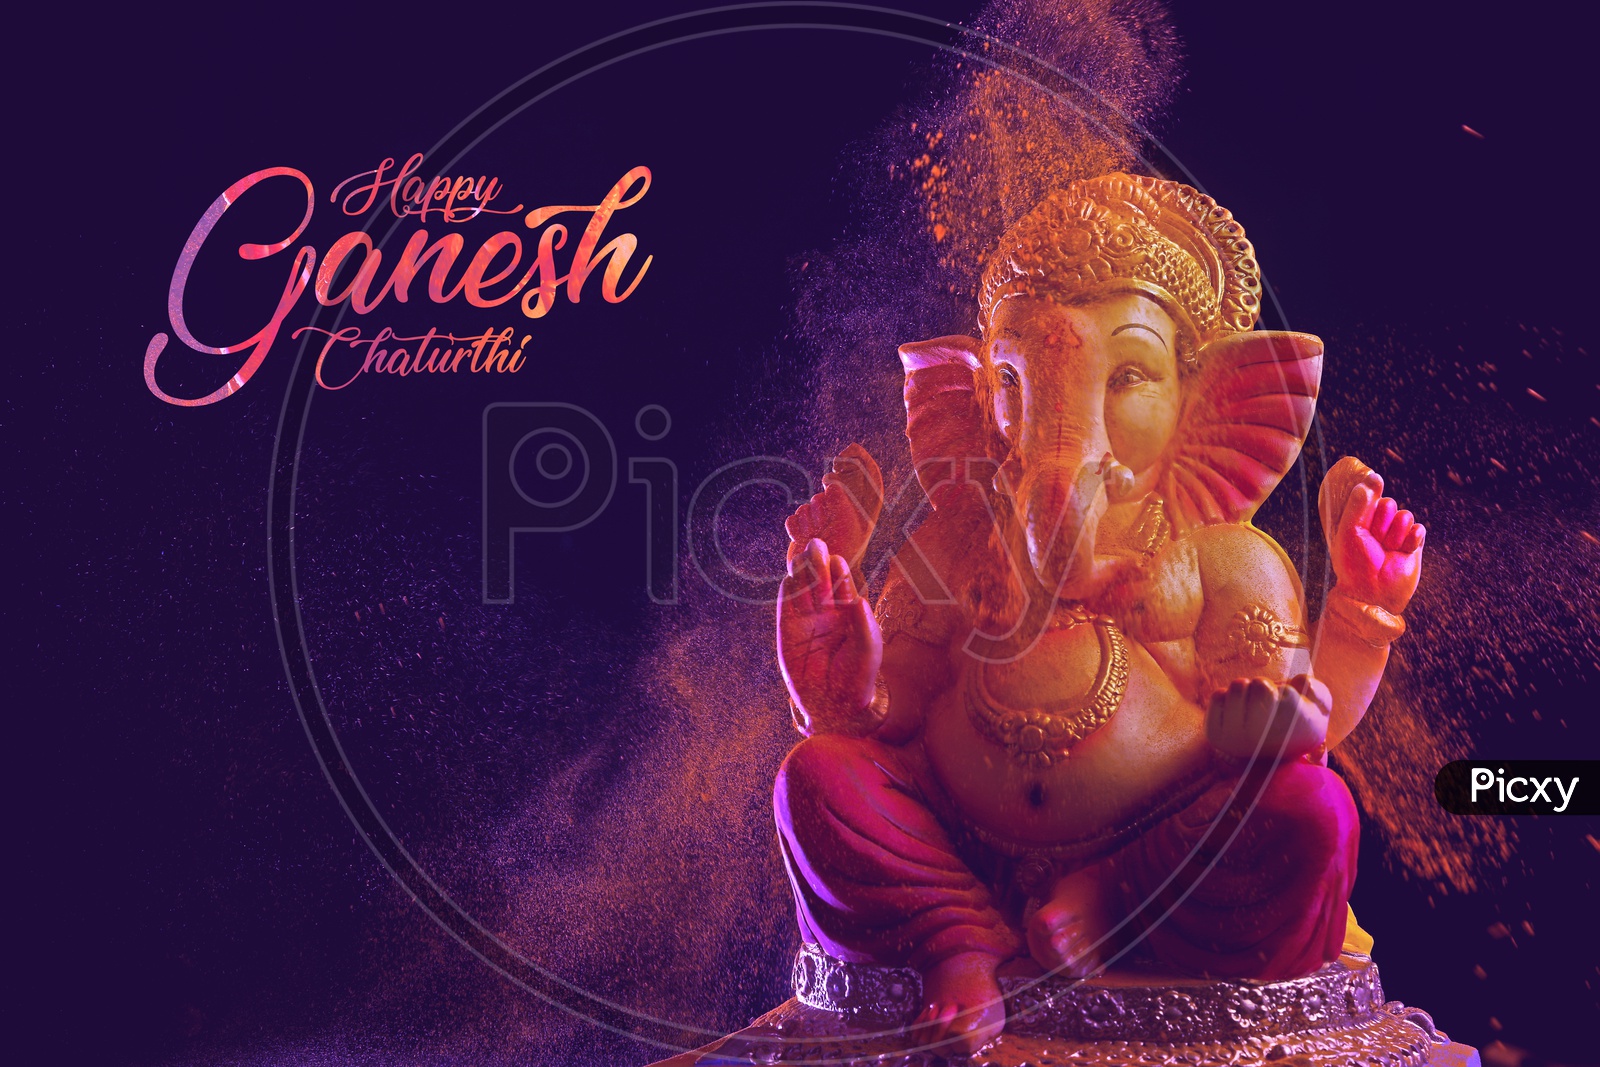 Image of Happy Ganesh Chaturthi Poster with Ganesh Idol and ...